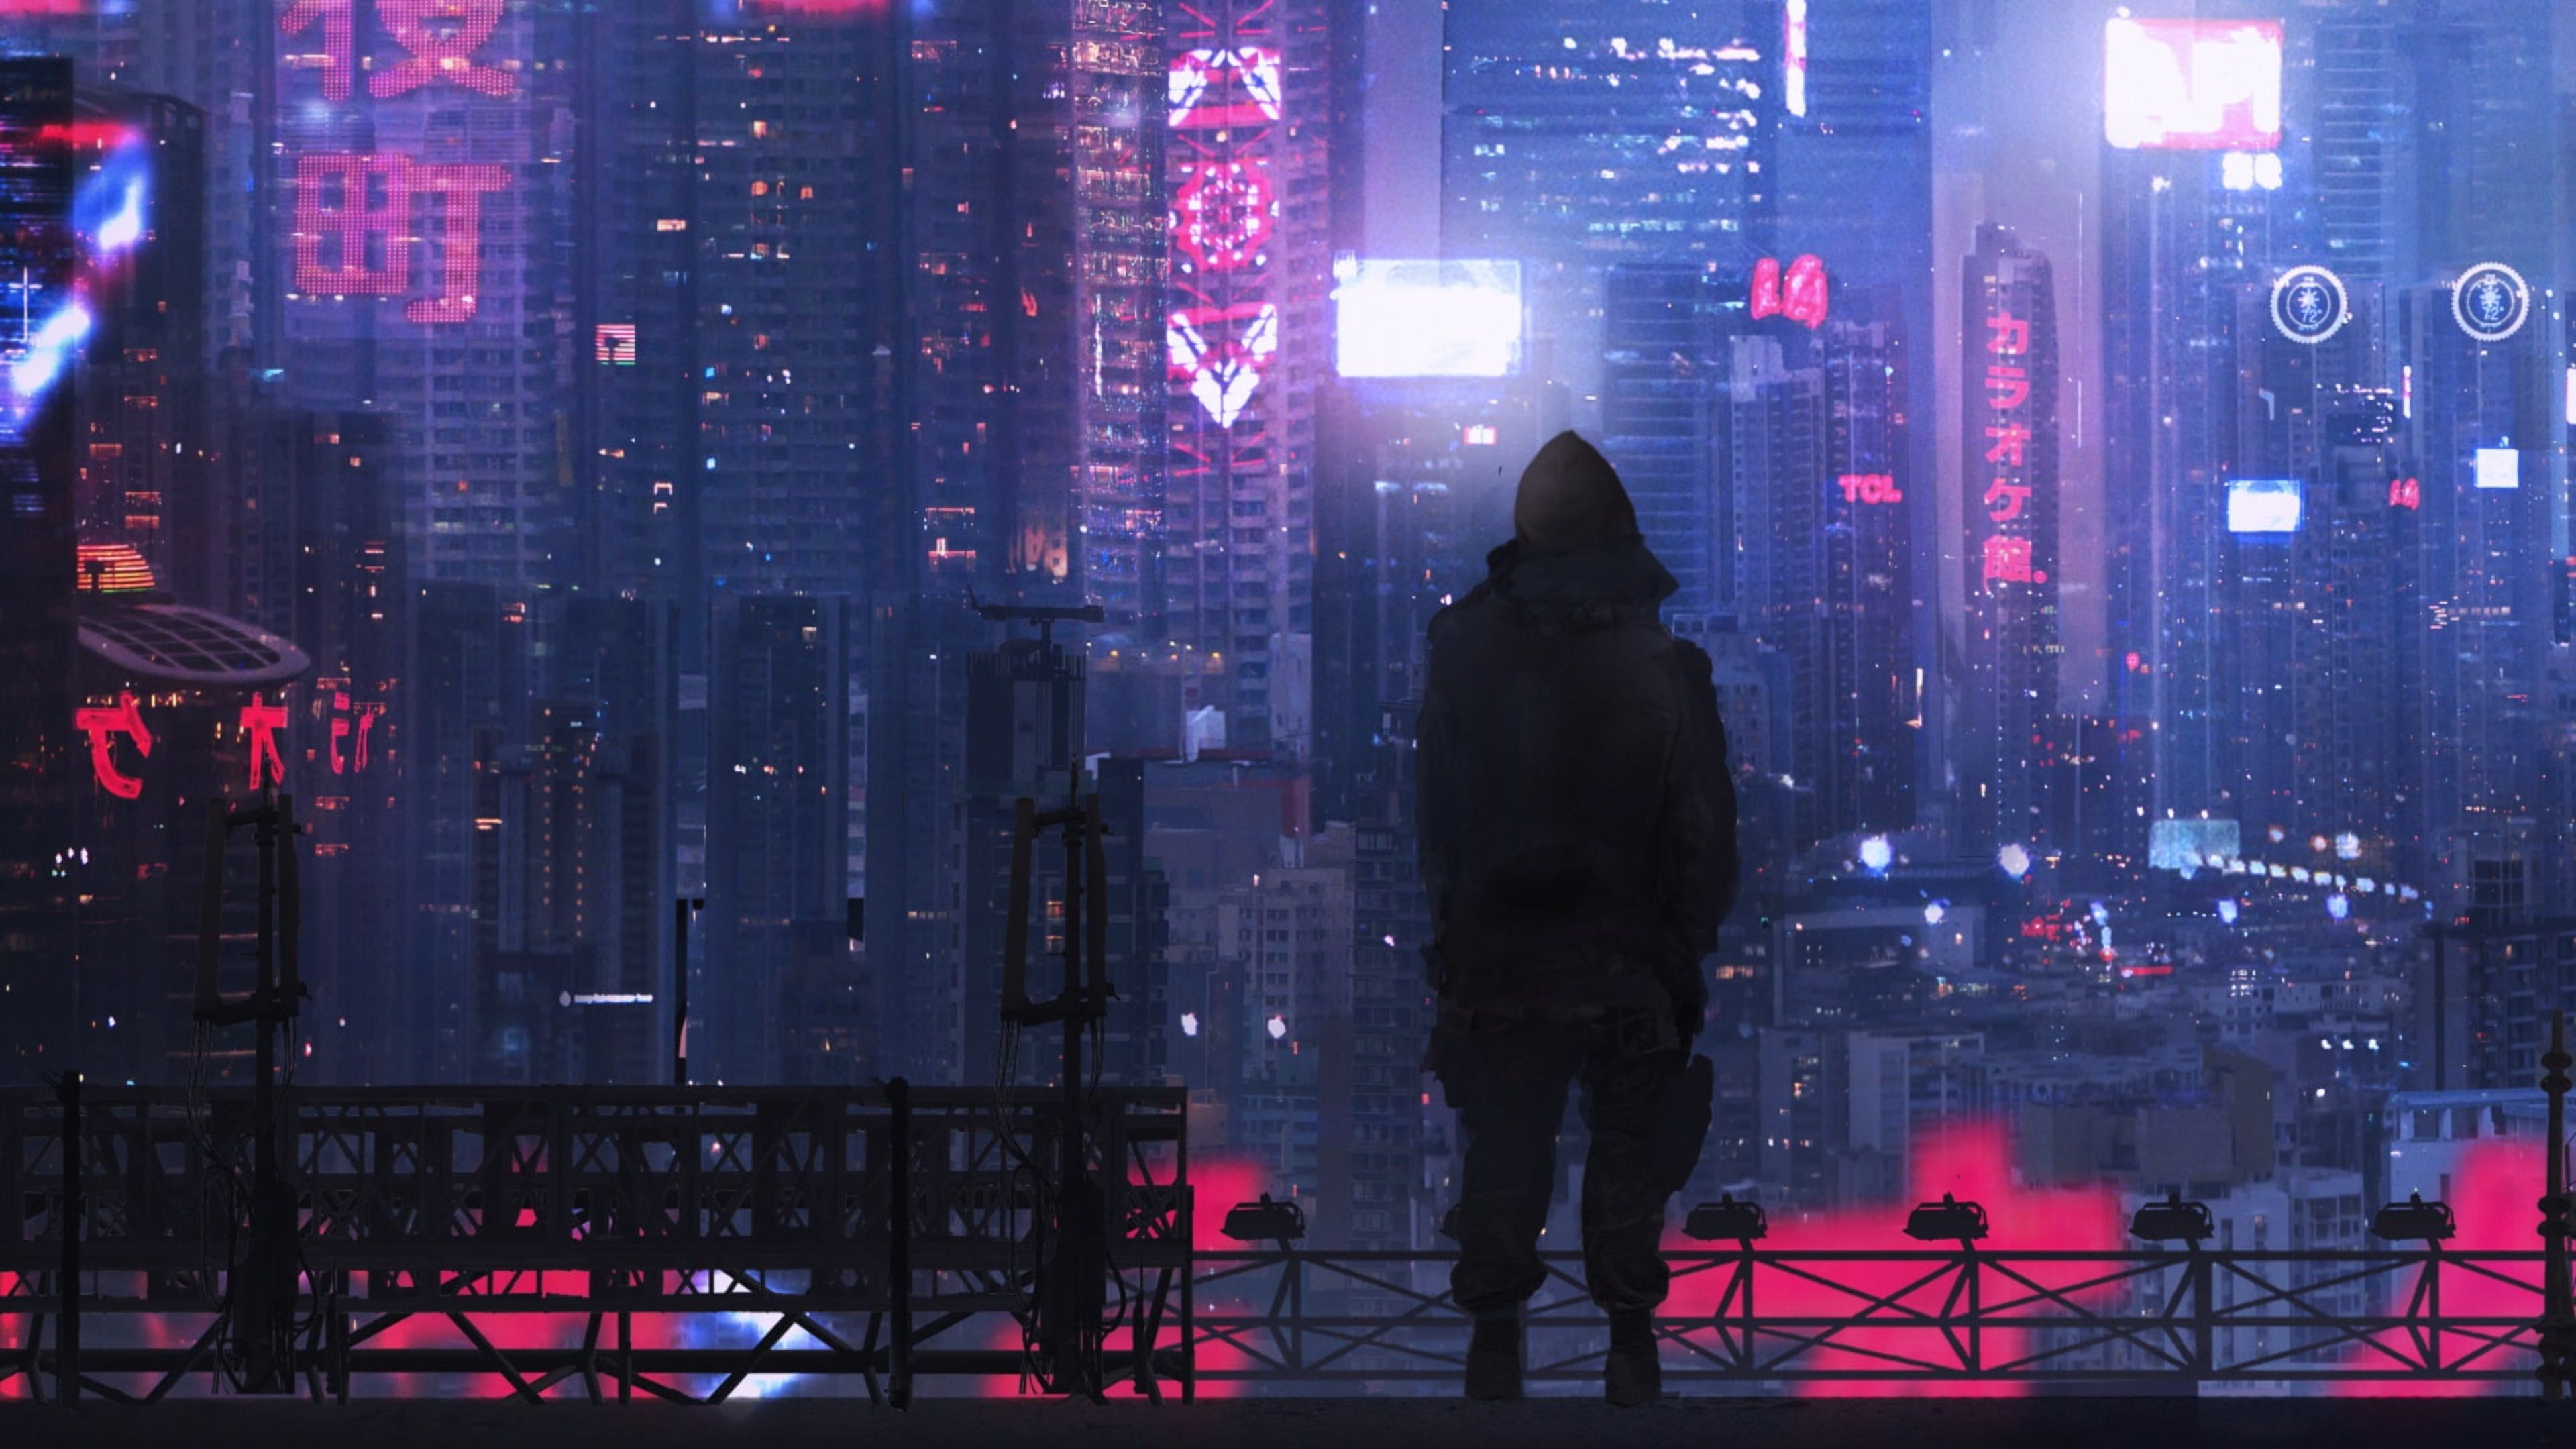 Cyberpunk 4K wallpapers for your desktop or mobile screen free and easy